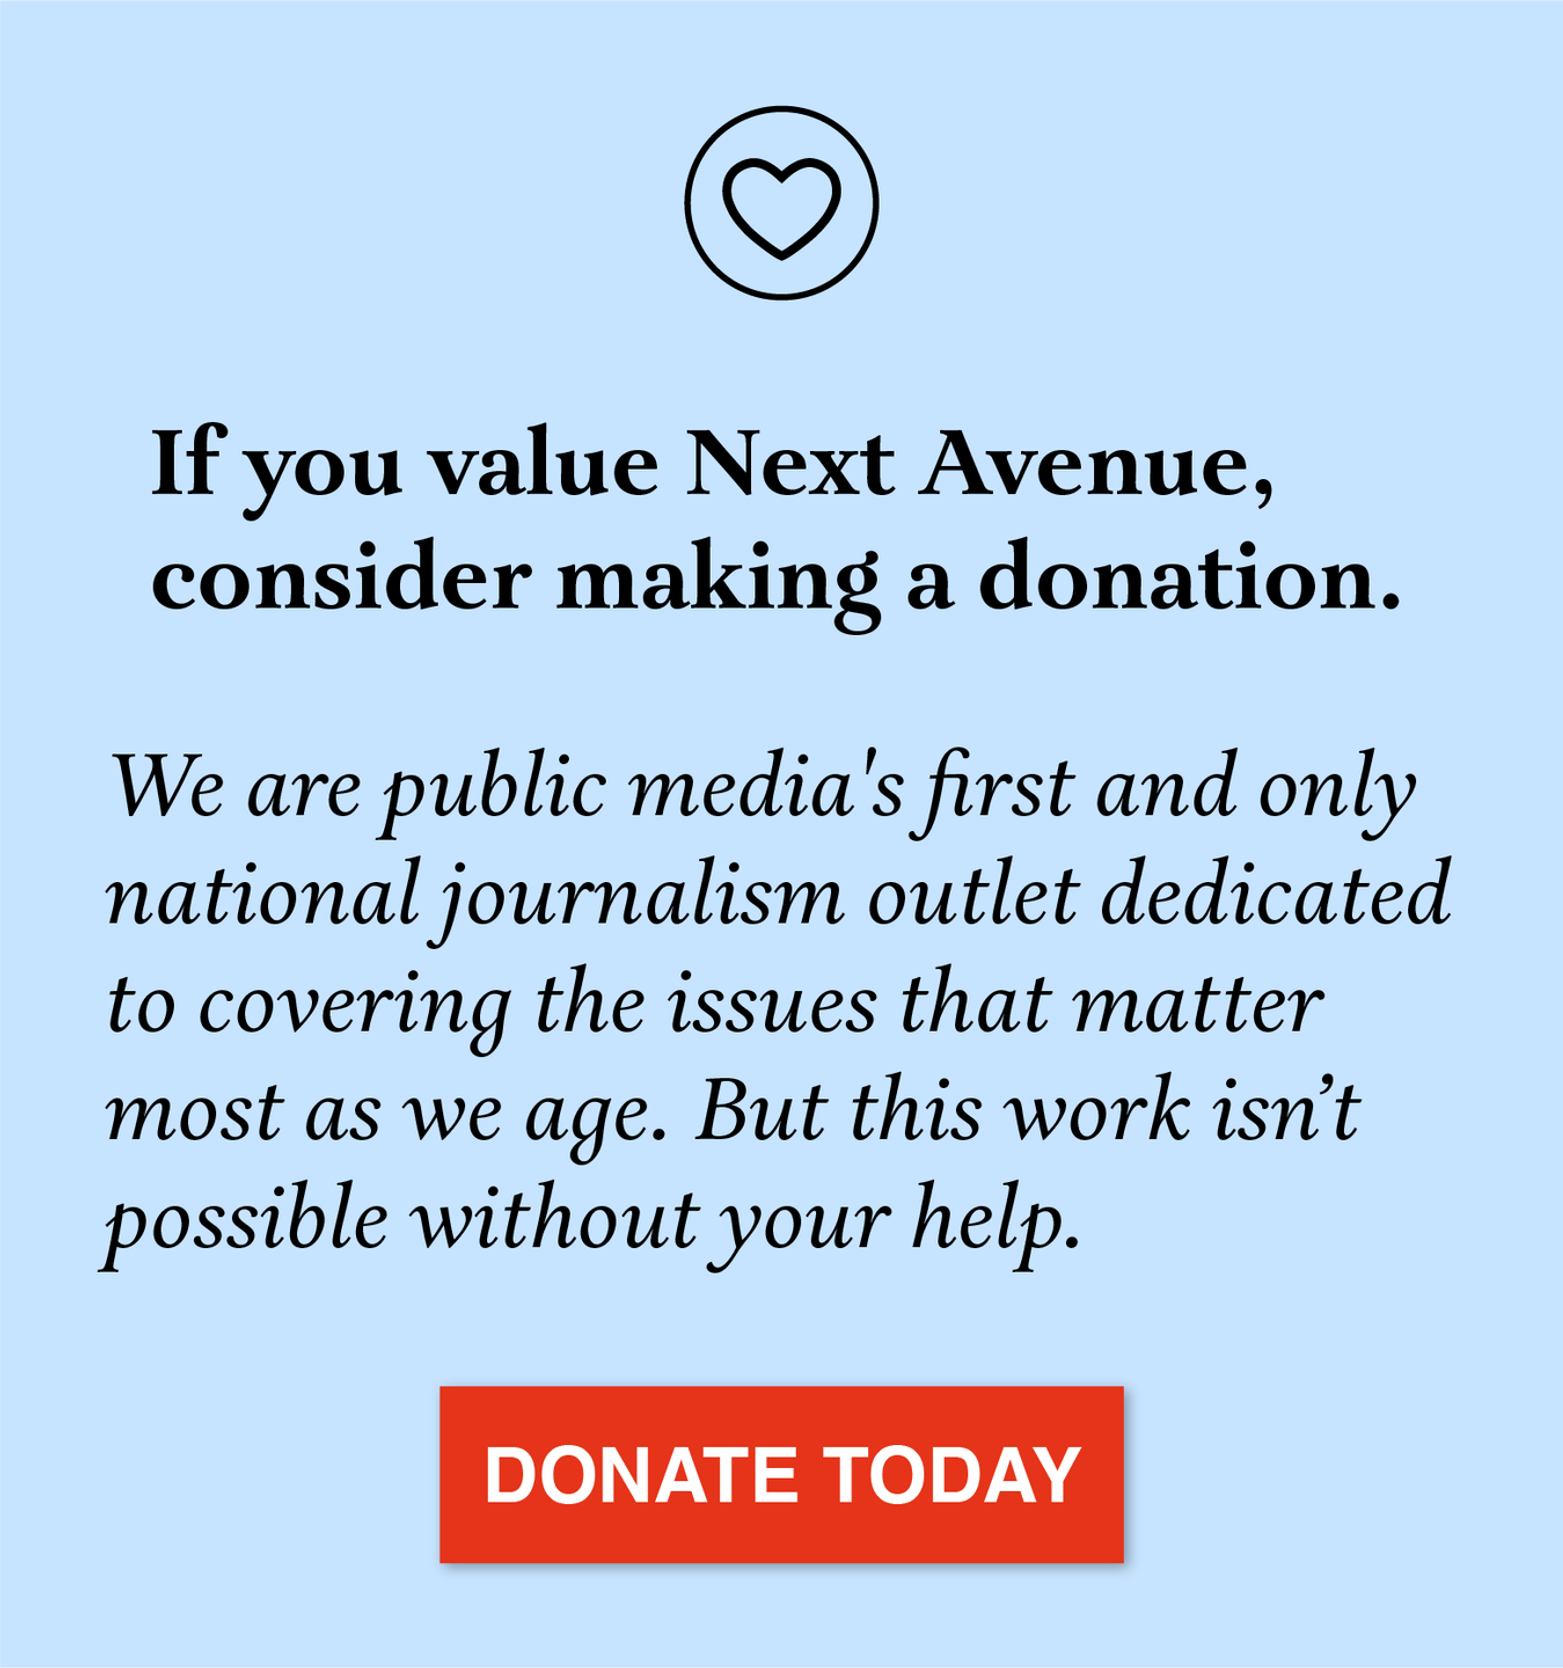 Graphic that reads, "We are public media's first and only national journalism outlet dedicated to covering the issues that matter most as we age. But this work isn’t possible without your help." Next Avenue